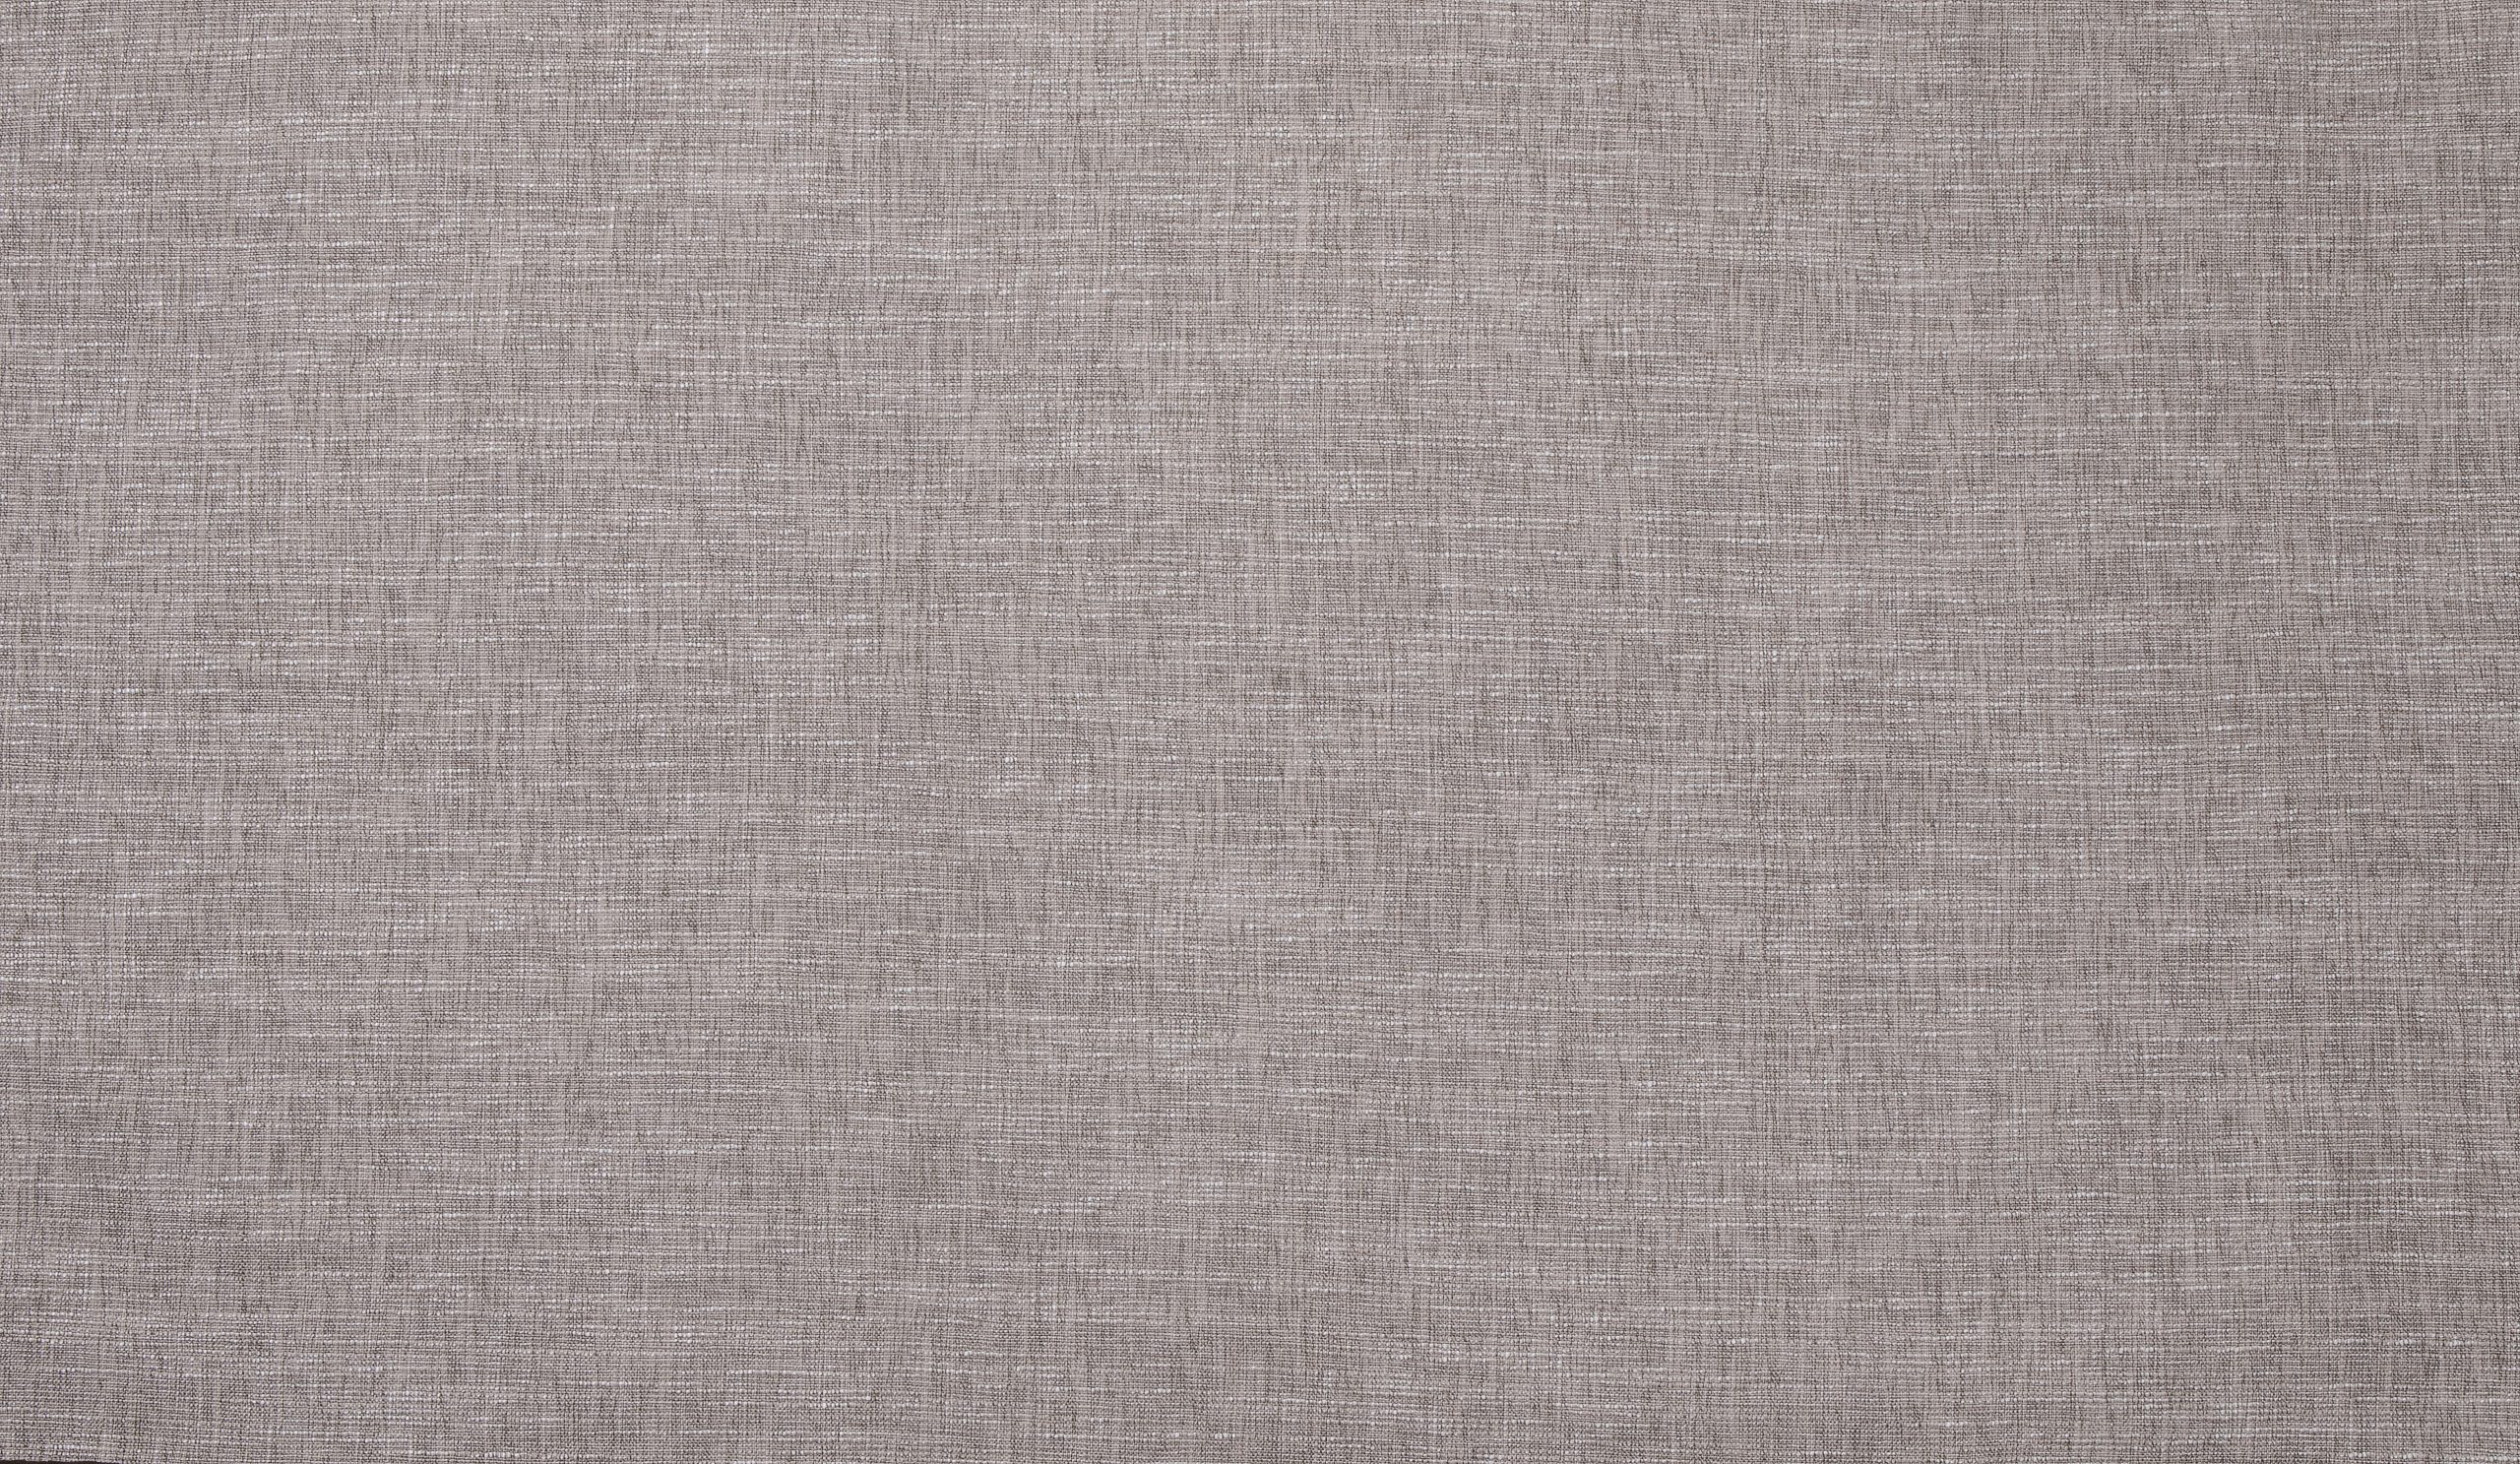 Relaxed Plains Esme Sand Fabric